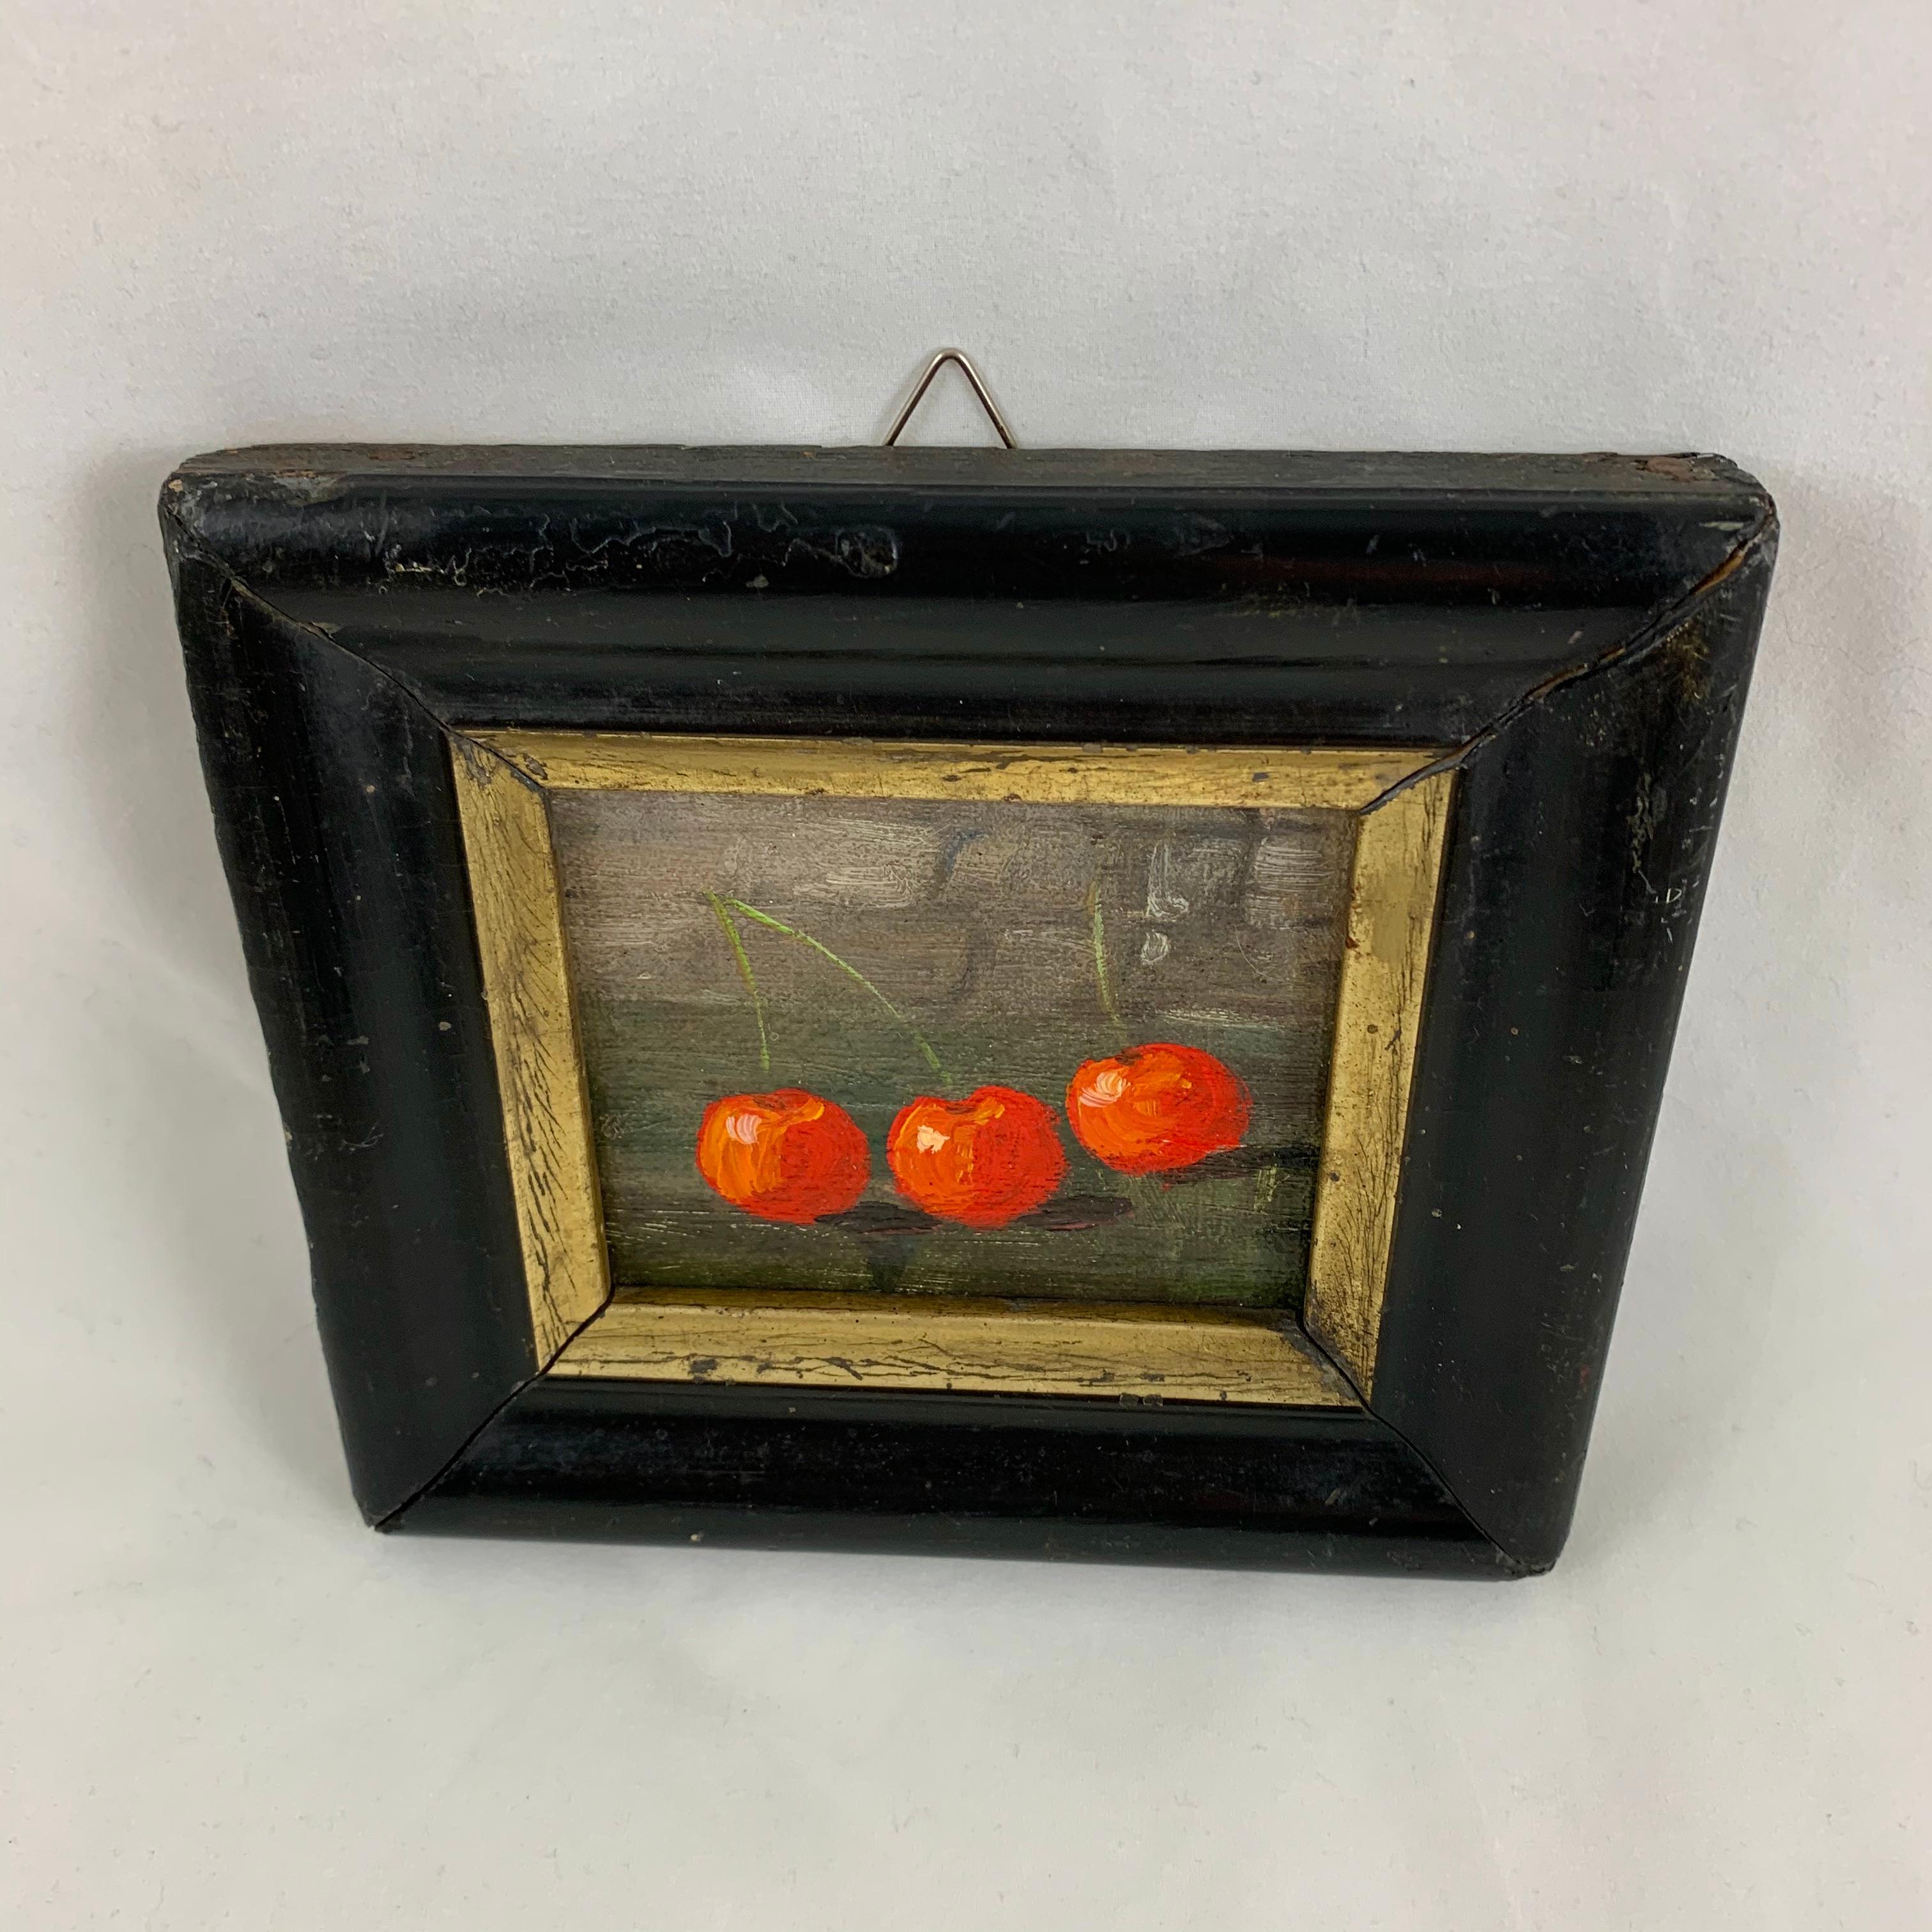 Found in France, a charming, early 20th century French still life of three red cherries, Les Trois Cerises, painted in oil on board. The cherries pop brightly from the background that faintly shows a stone wall. Presented in a wide wood frame,